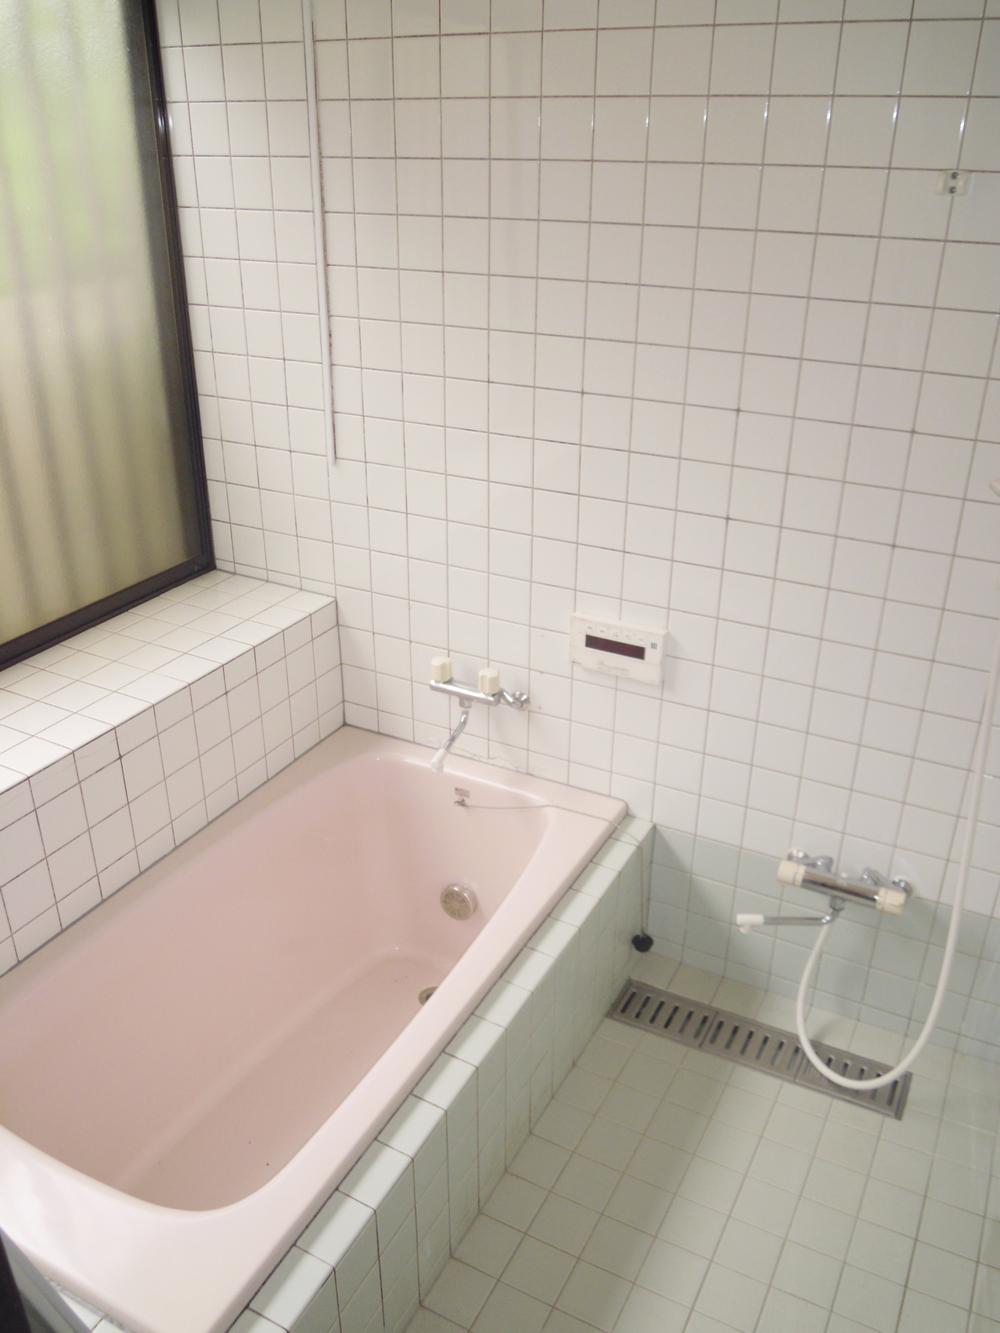 Bathroom. Bathroom there is a window. Brightly, It is also useful to ventilation